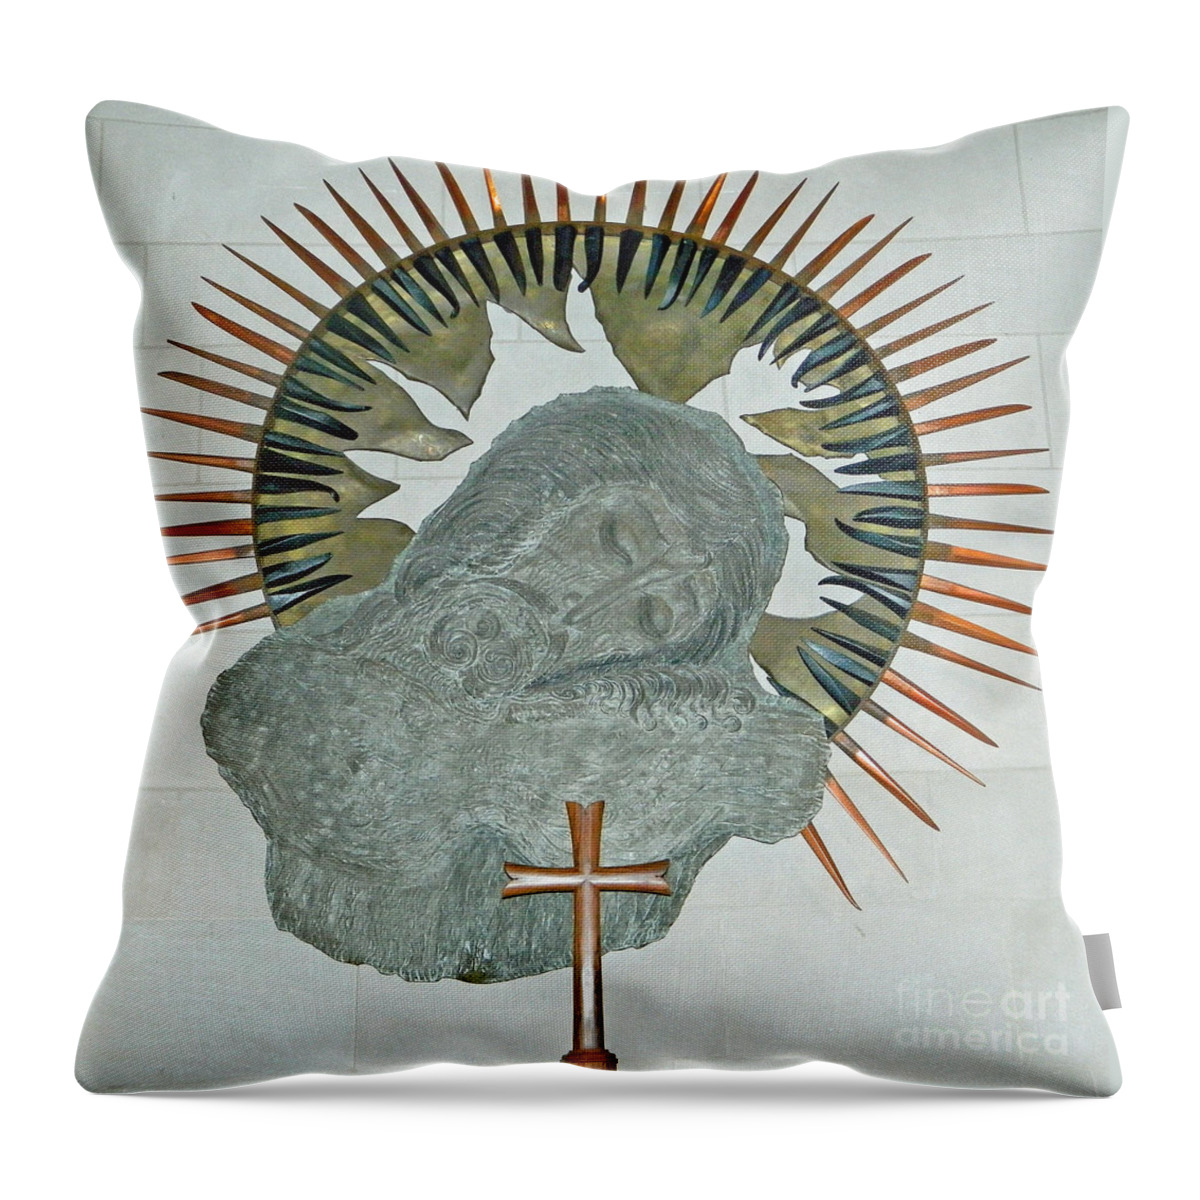 The Suffering Christ Throw Pillow featuring the photograph The Suffering Christ by Emmy Vickers